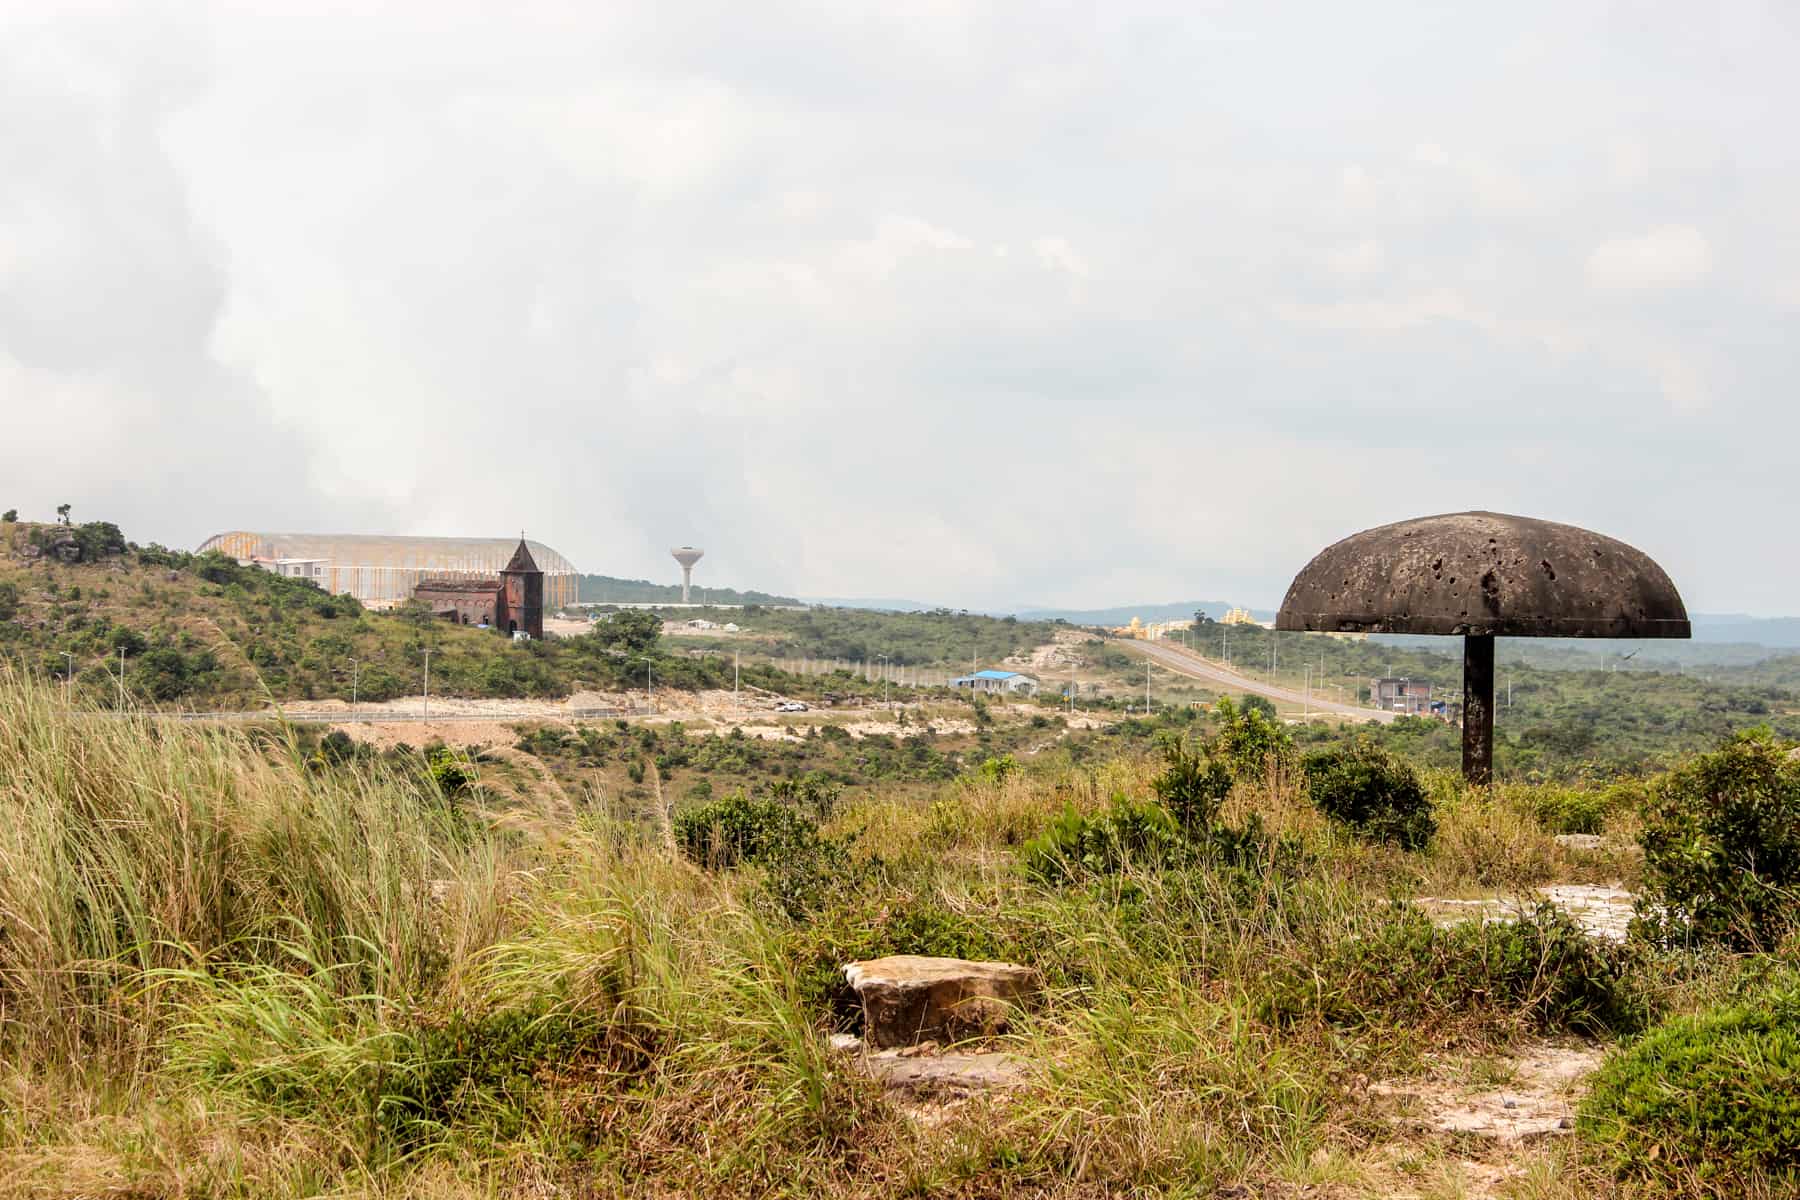 A metal mushroom shaped structure and other distant abandoned structures in unkempt nature on a hilltop in Cambodia. 